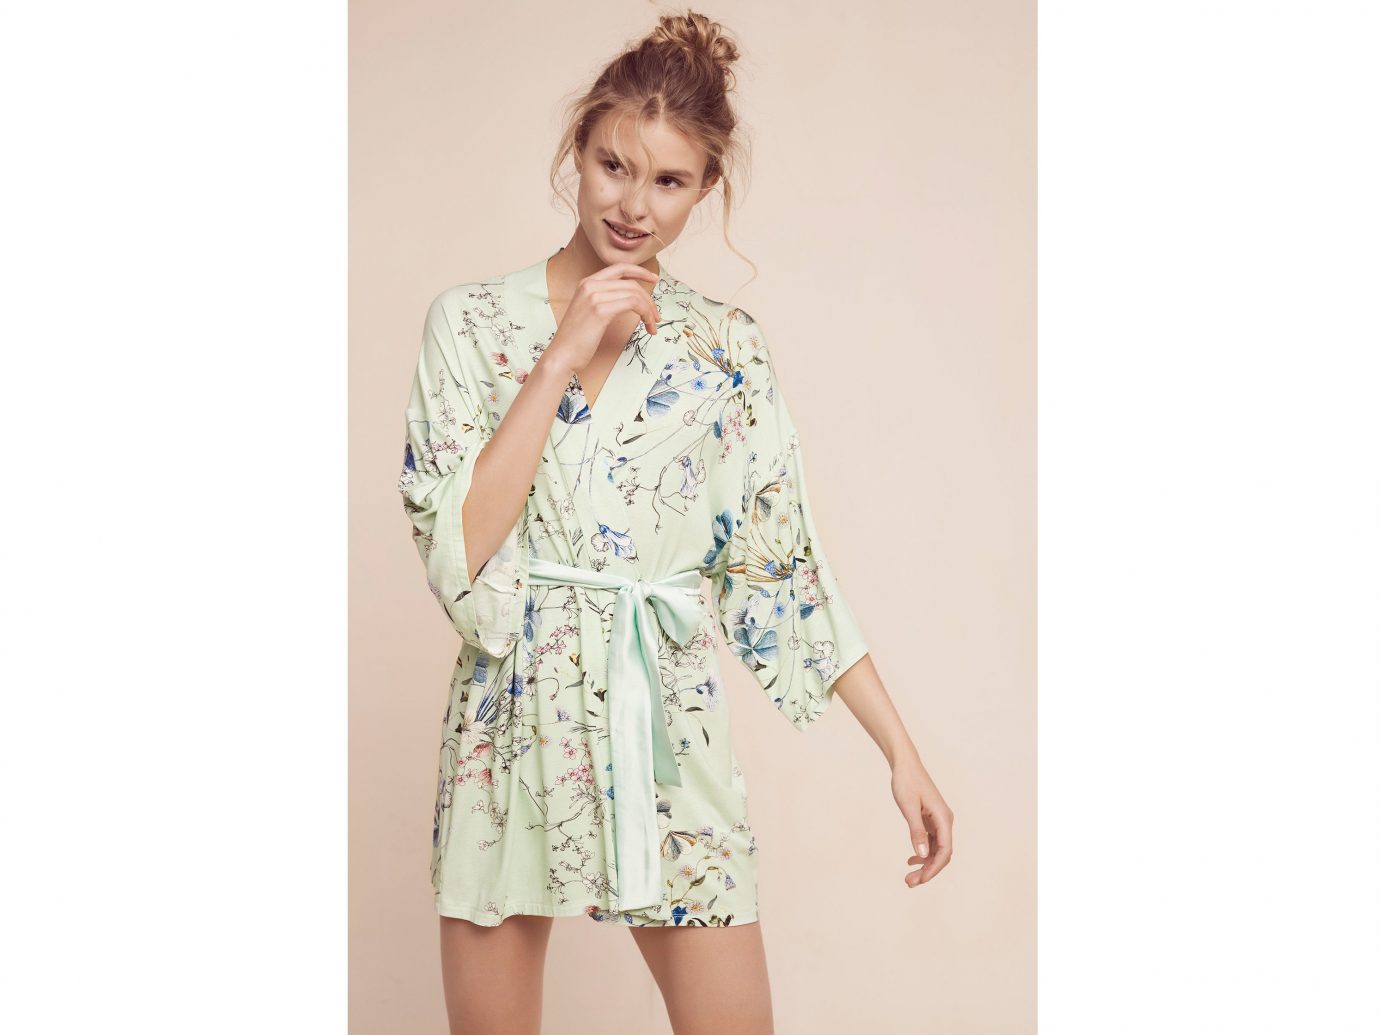 Style + Design clothing person indoor sleeve dress standing girl outerwear spring gown pattern blouse photo shoot textile robe costume Design posing trouser